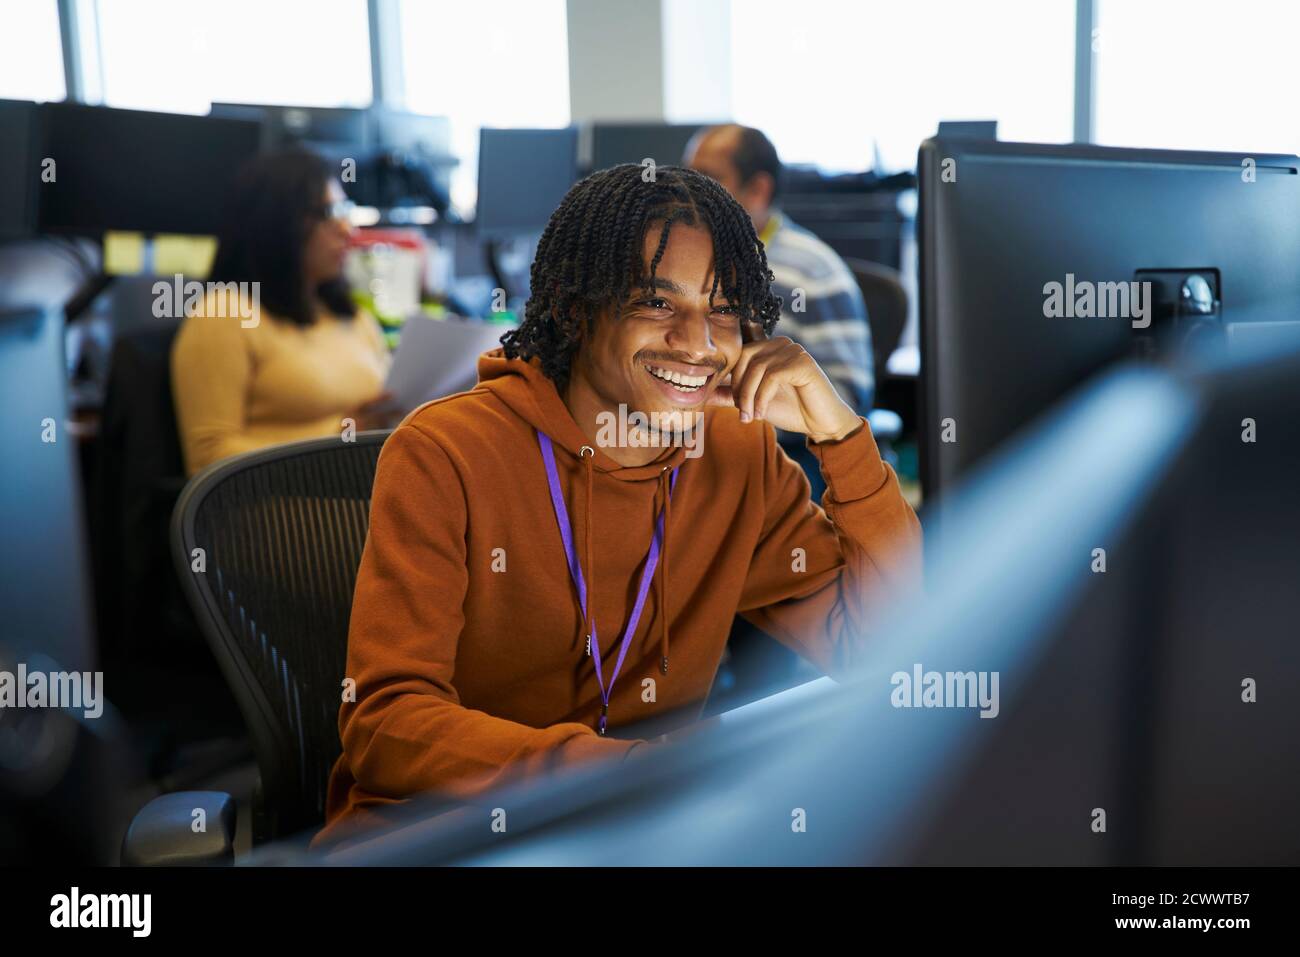 Smiling businessman working at computer in office Banque D'Images